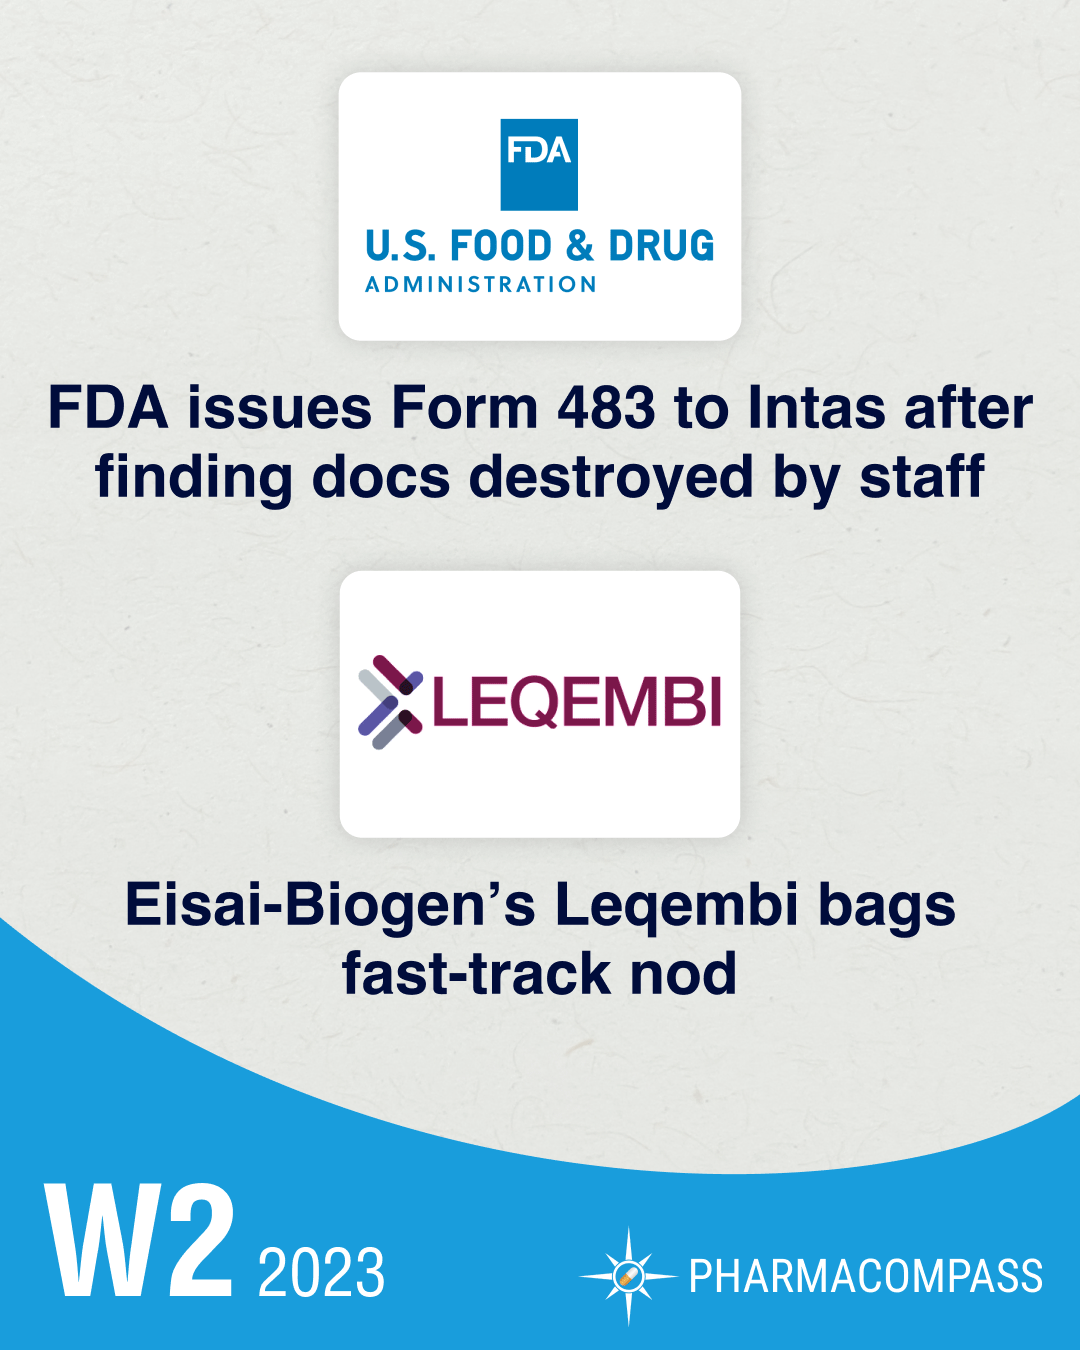 FDA issues Form 483 to Intas after finding docs destroyed by staff; Eisai-Biogen’s Leqembi bags fast-track nod